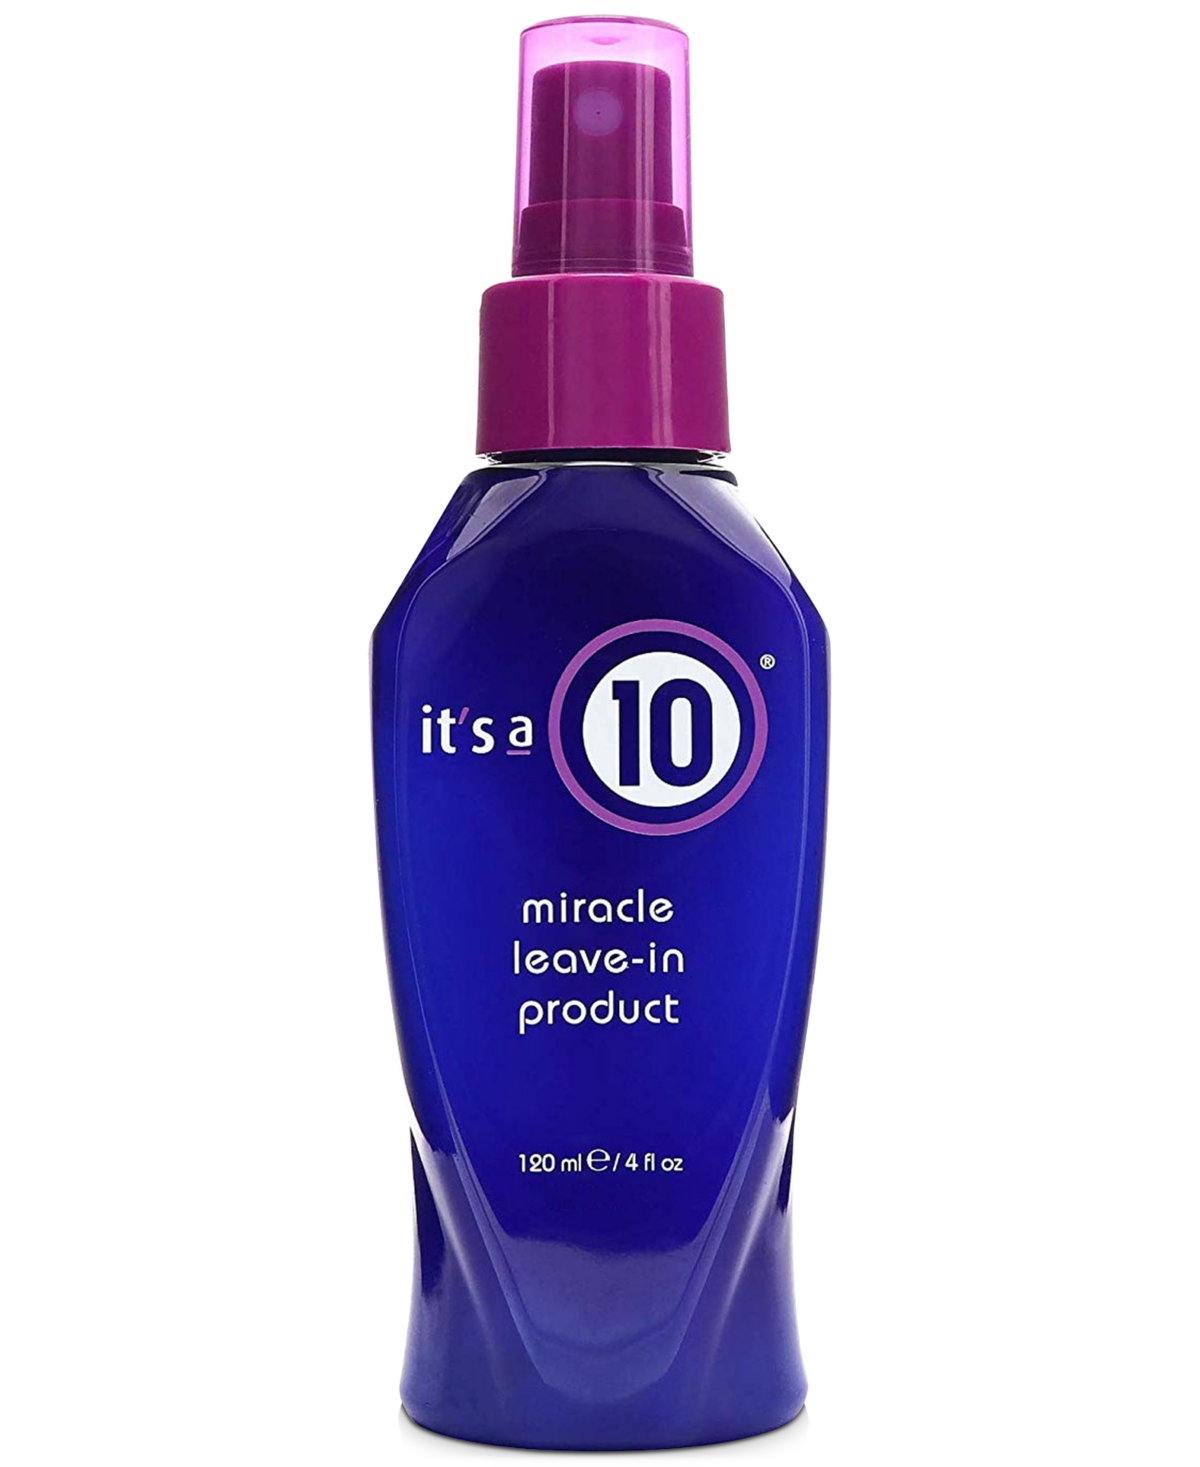 It's a 10 Miracle Leave-In, 4-oz, from Purebeauty Salon & Spa